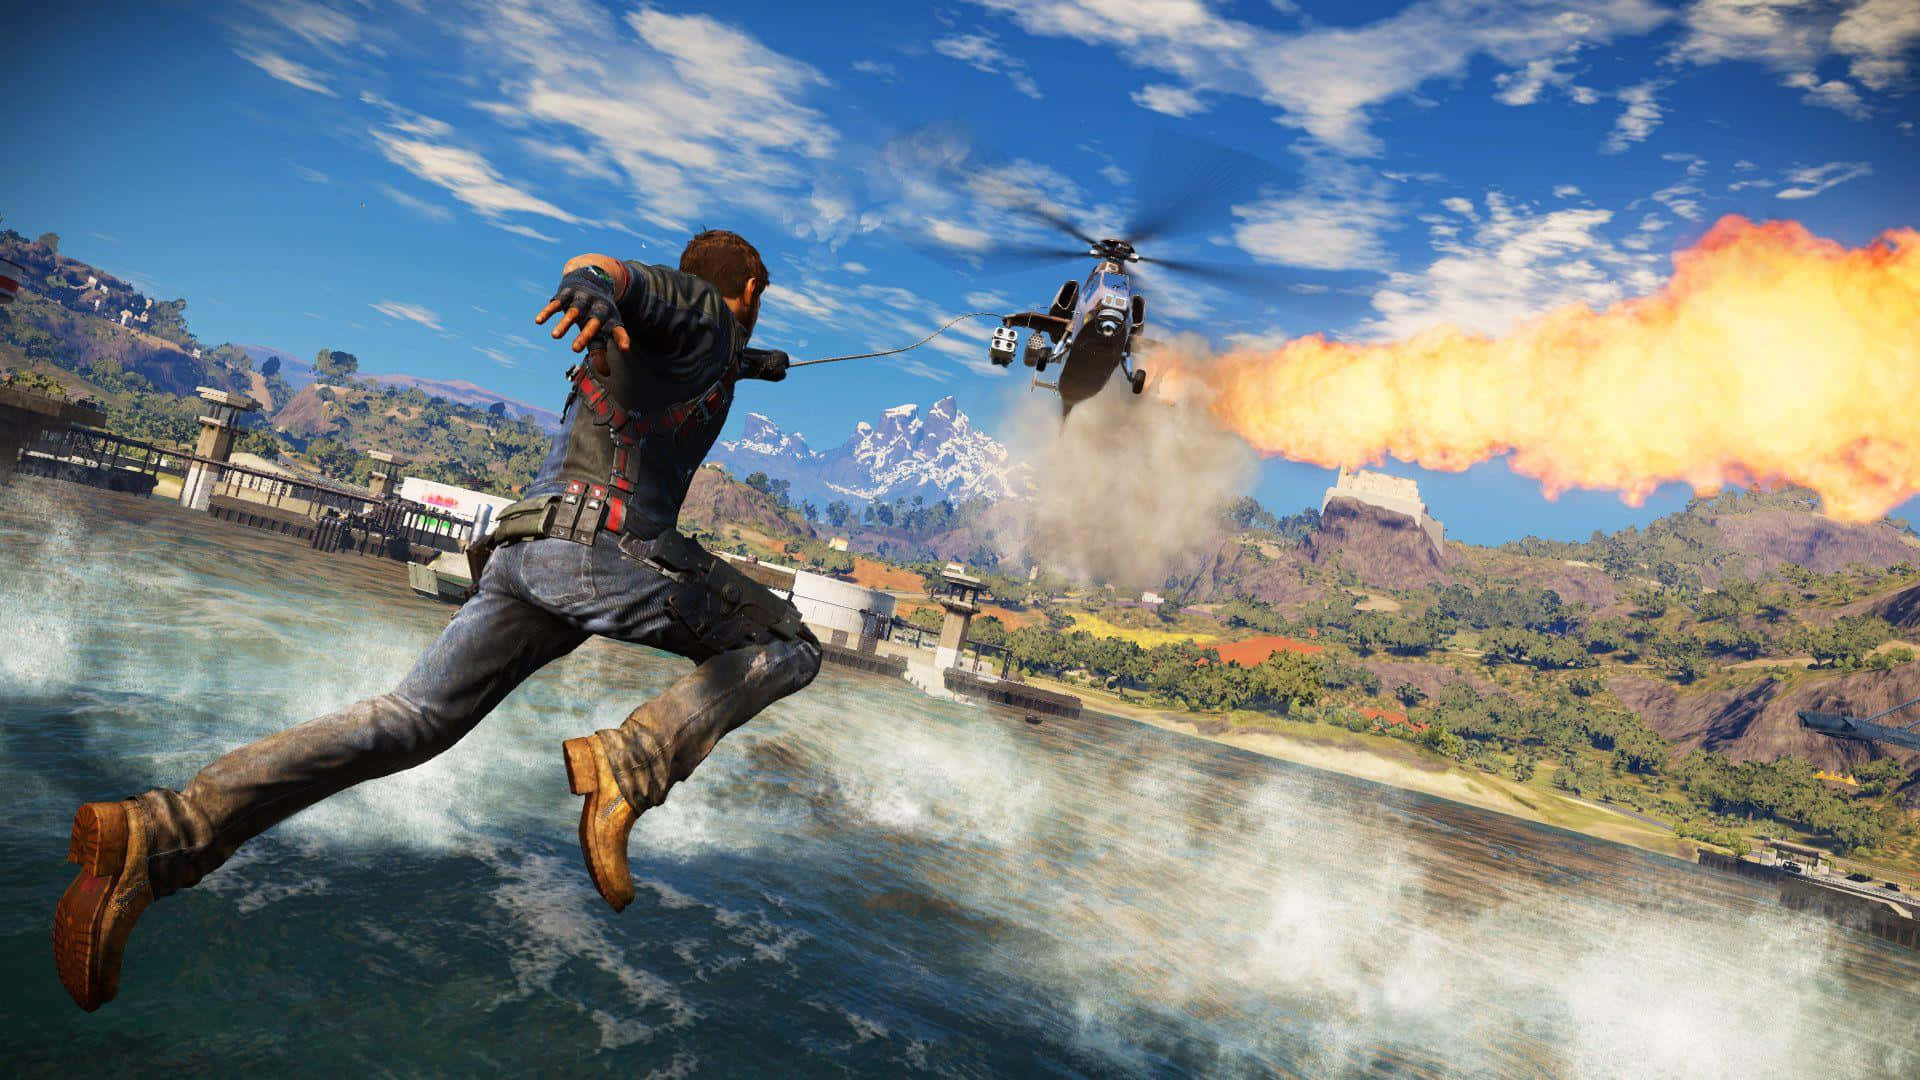 Best Just Cause 4 Background Rico Hooking A Helicopter